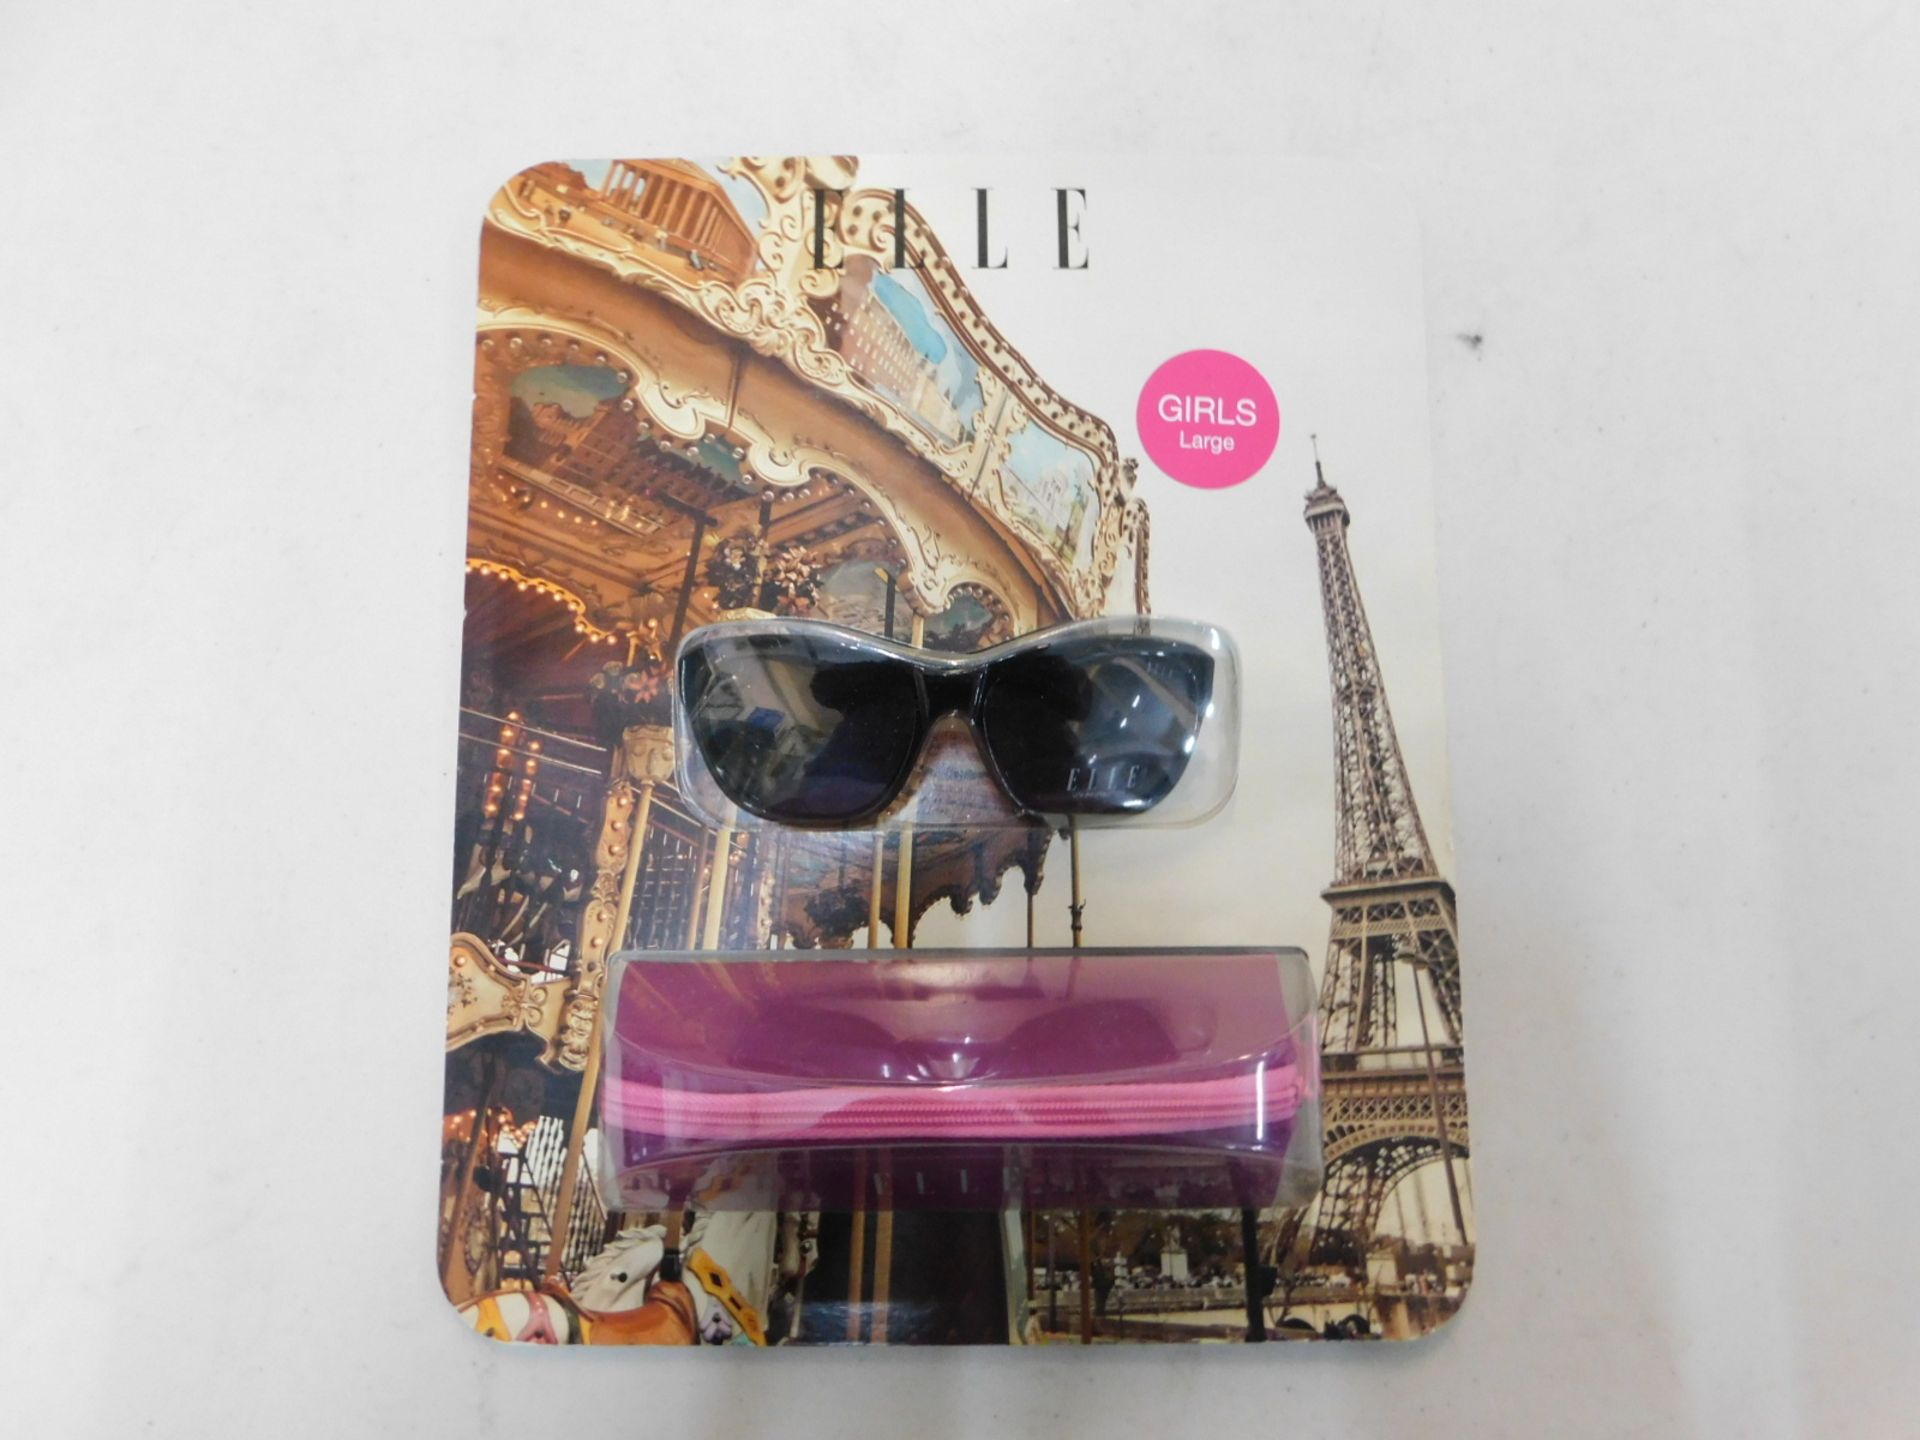 1 PACK OF ELLE GIRLS SUNGLASSES WITH CASE SIZE LARGE RRP Â£34.99